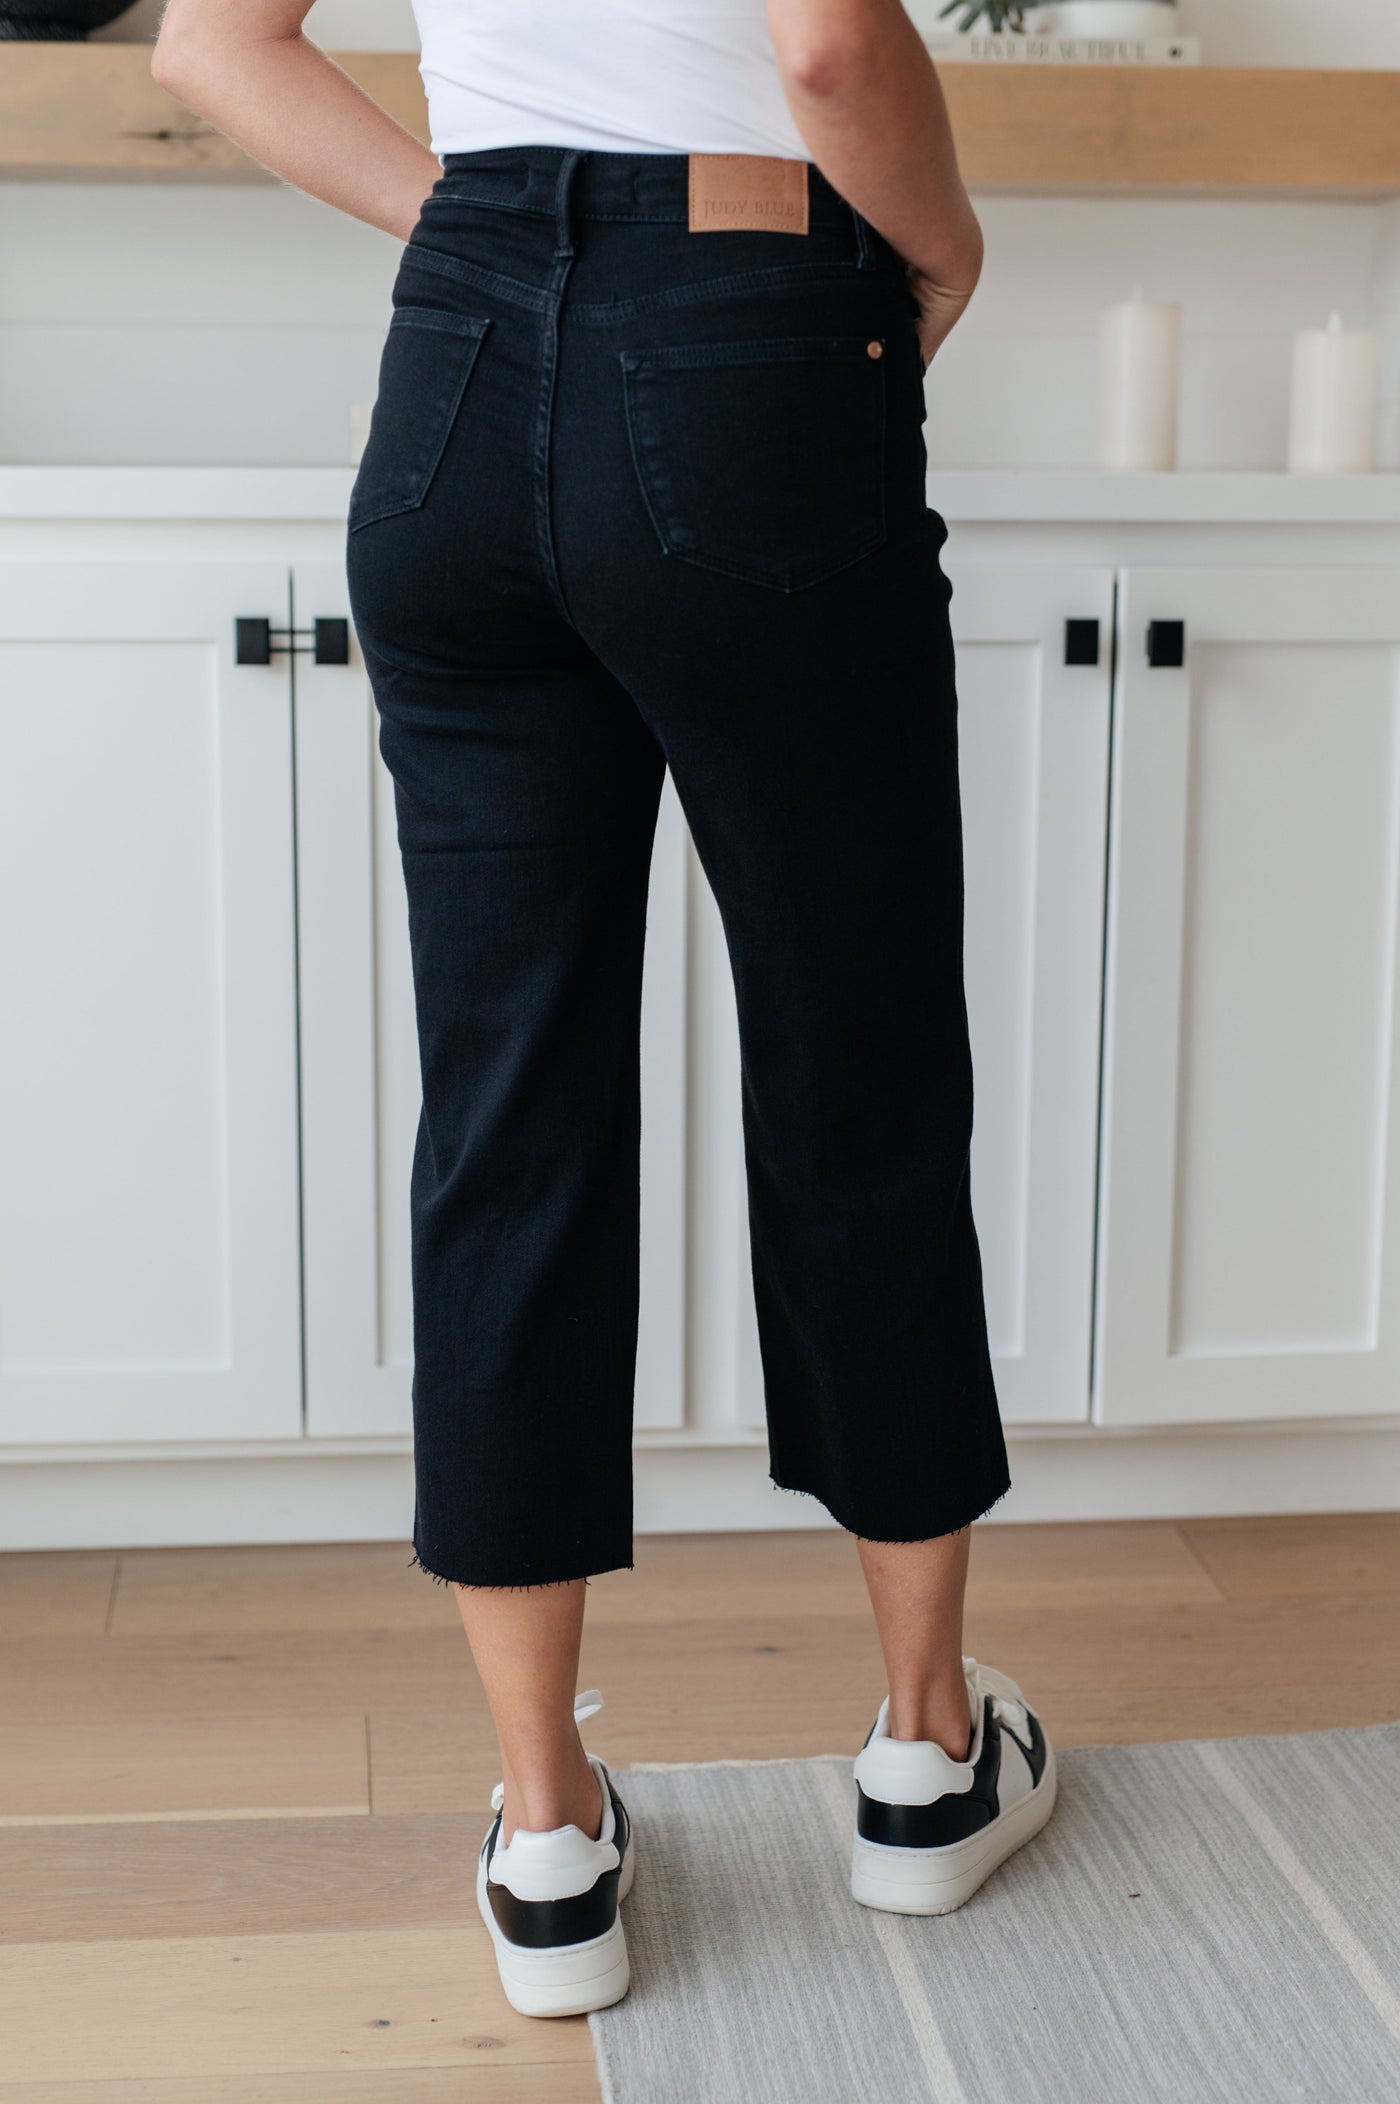 Judy Blue Lizzy High Rise Control Top Wide Leg Crop Jeans in Black - Southern Soul Collectives